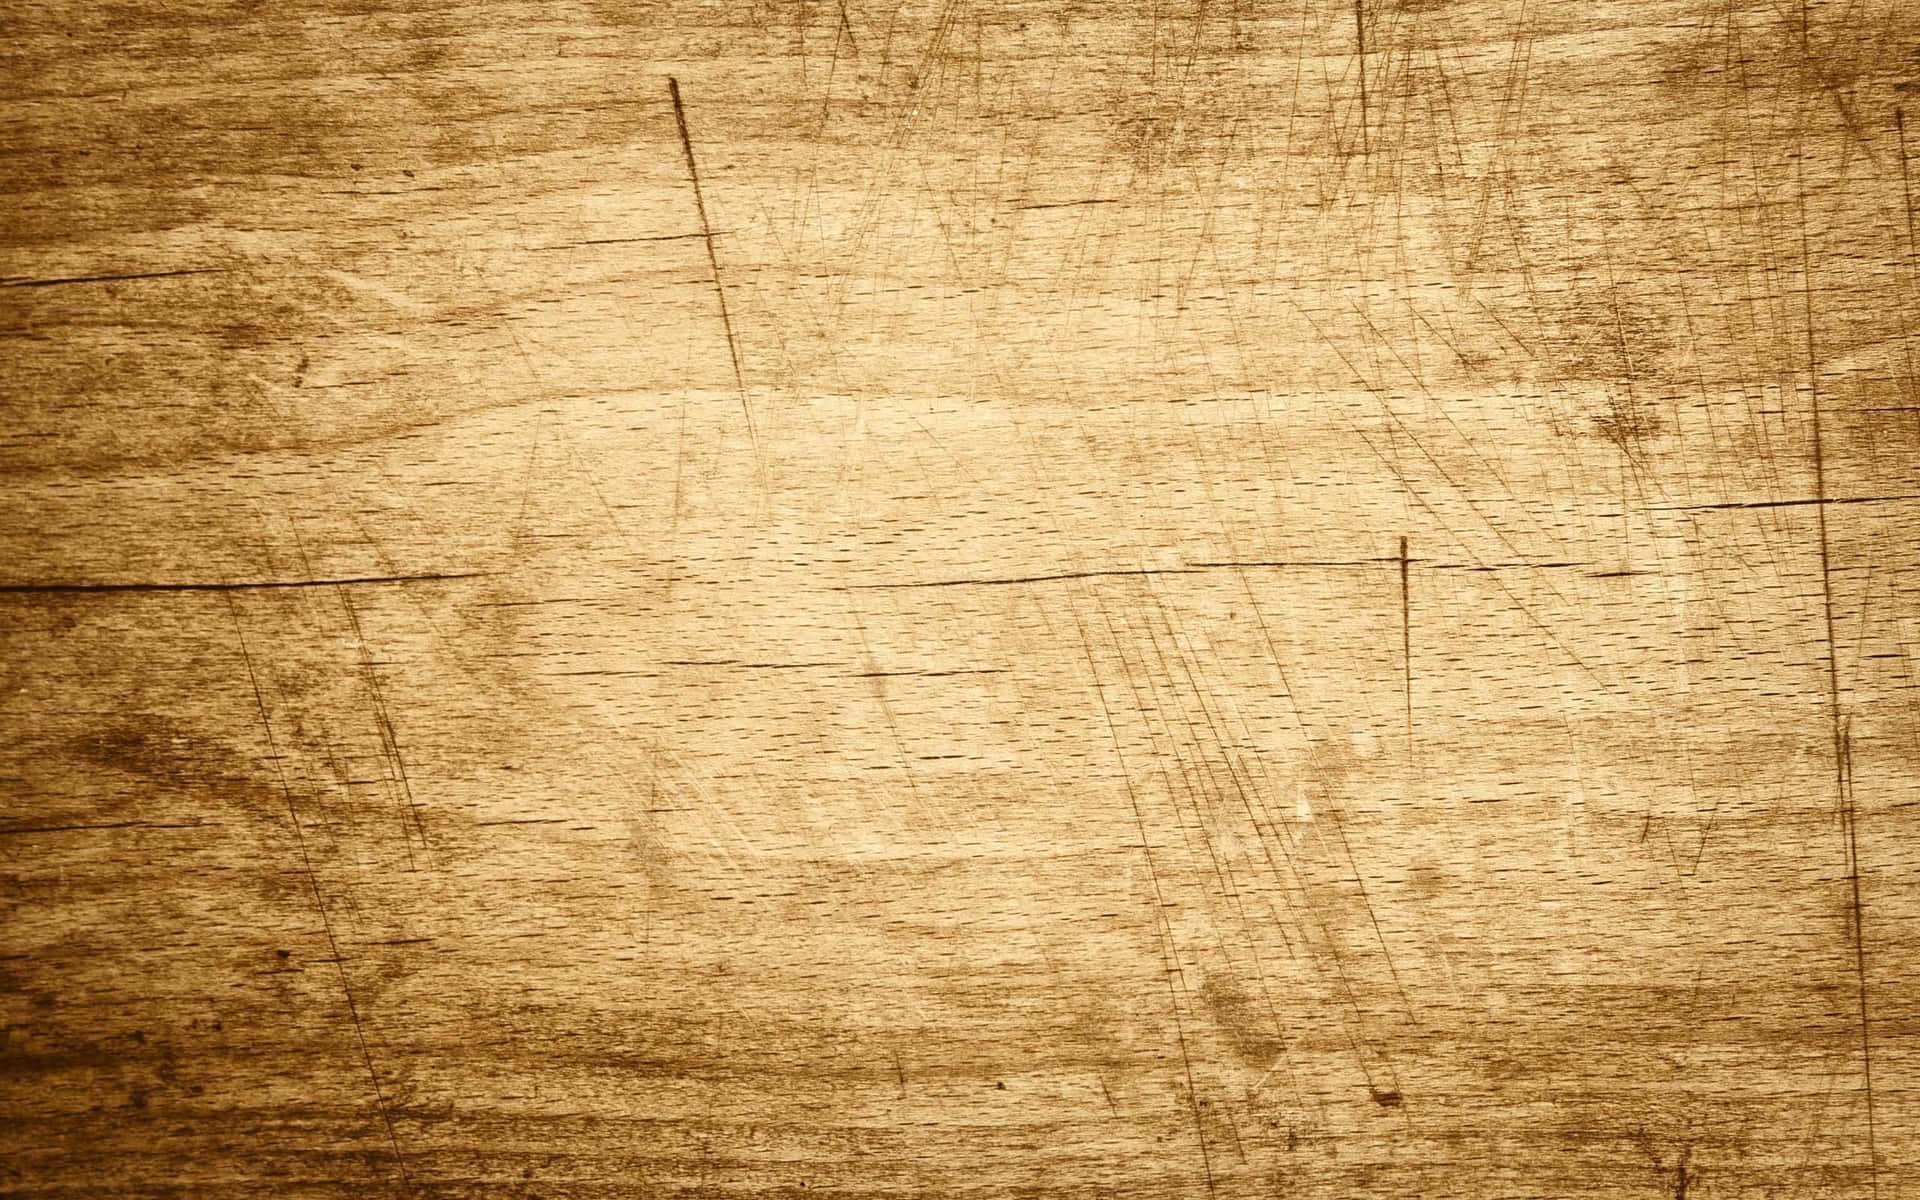 A Wooden Background With A Brown Color